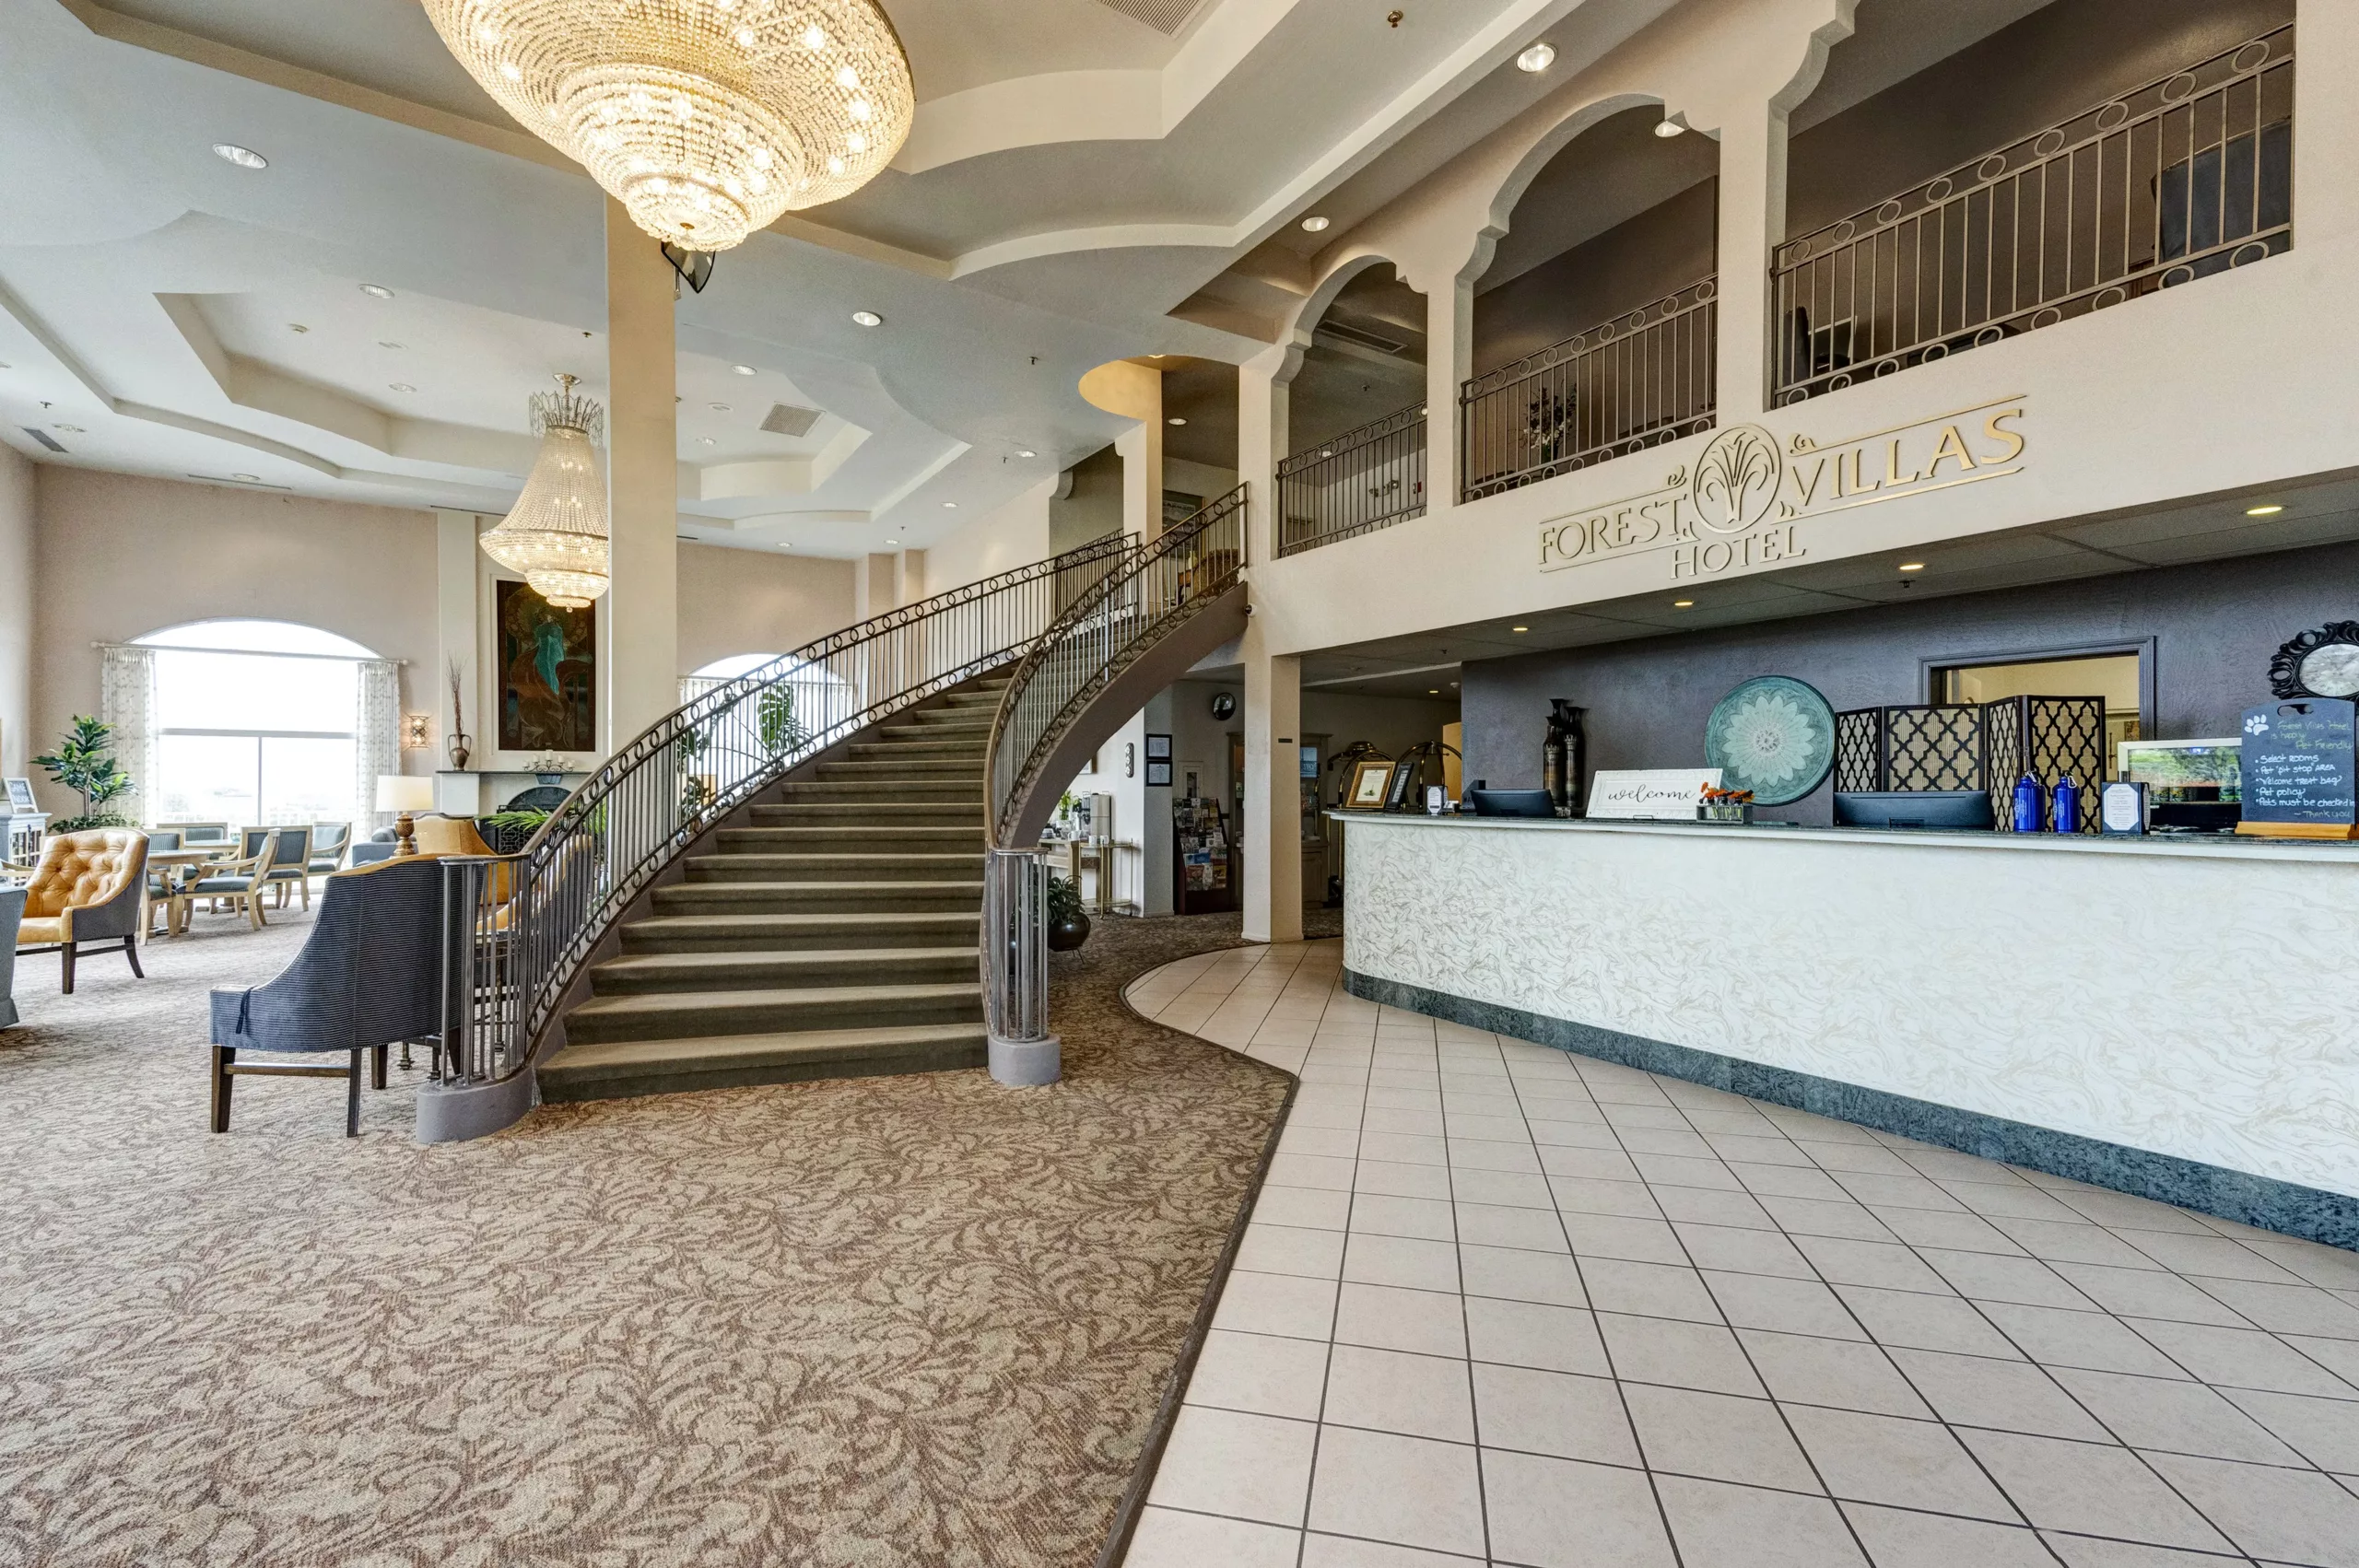 Forest Villas Hotel in Prescott Lobby and Staircase